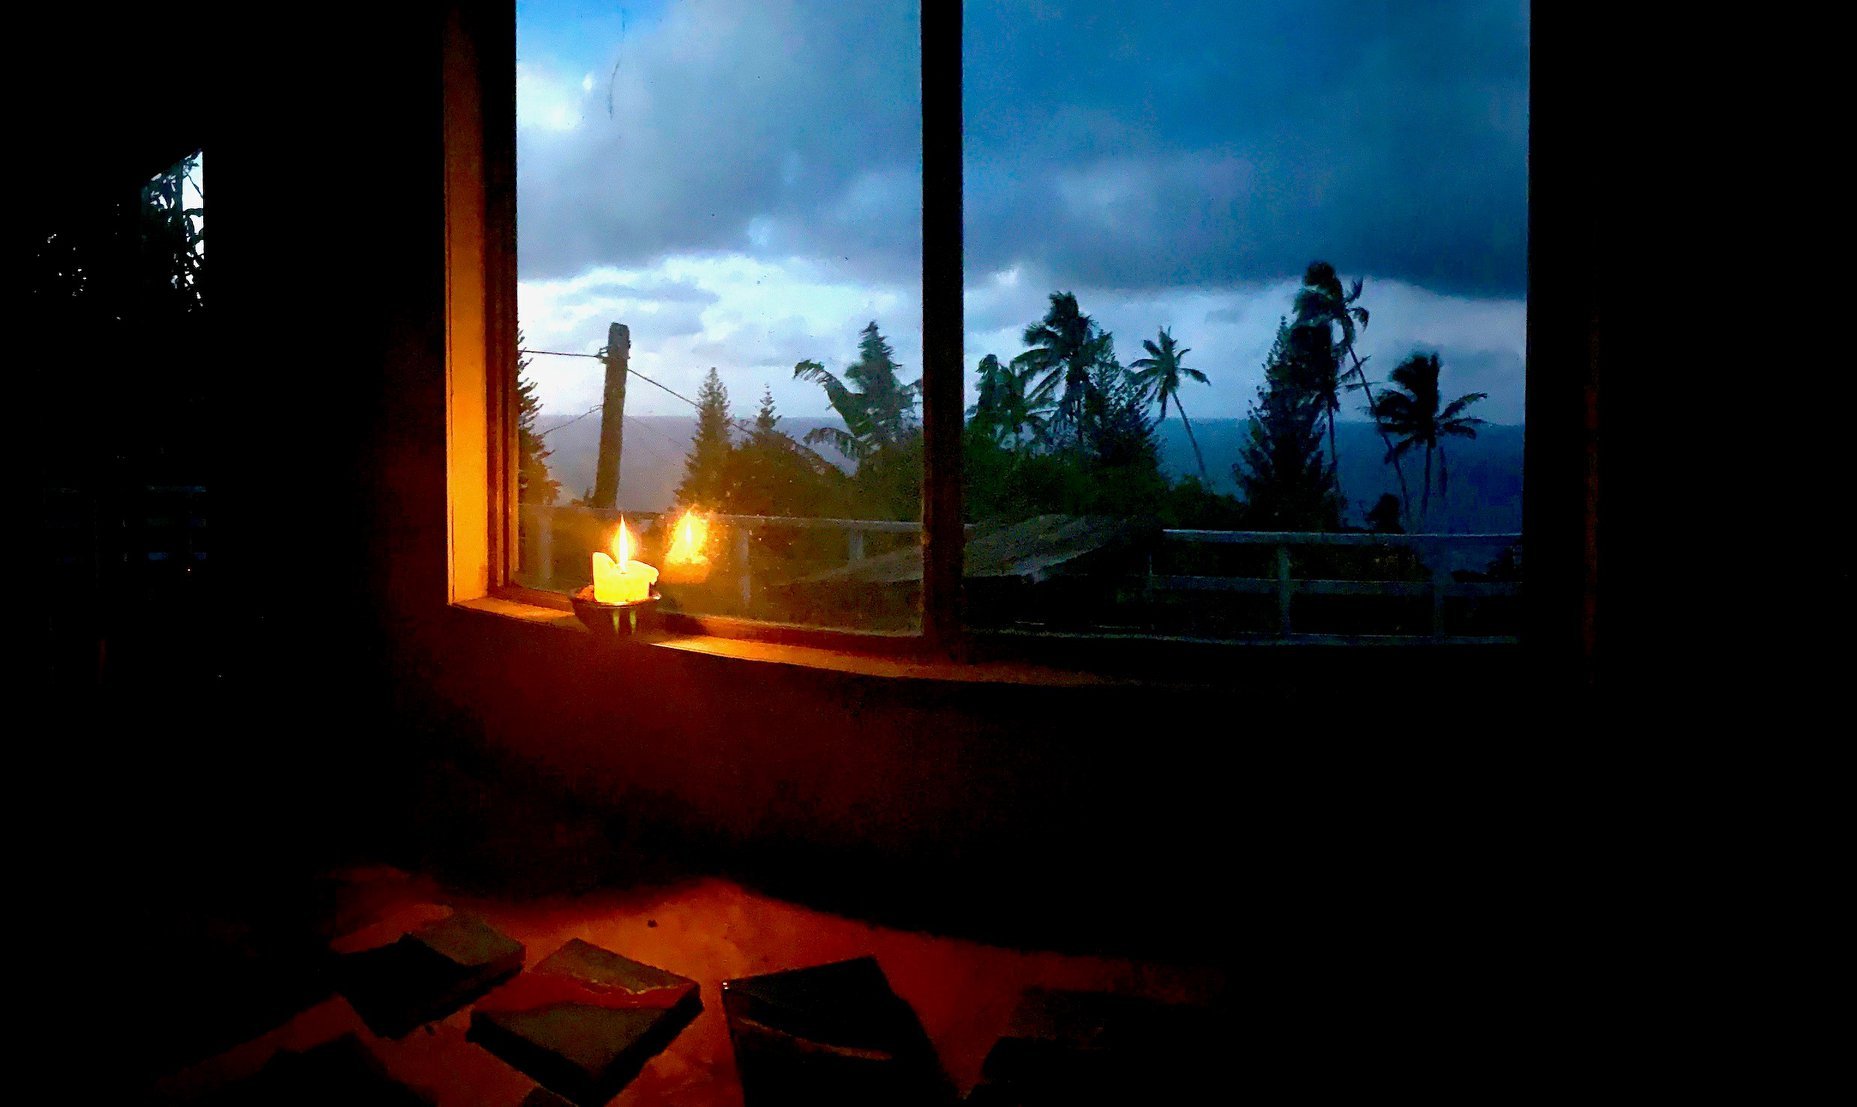 Pitcairn's Deputy Mayor, Kevin Young, frames a Candle in the Window for the world's empty horizons and the craft work he's put aside as Pitcairn manages its Covid-19 border controls. 